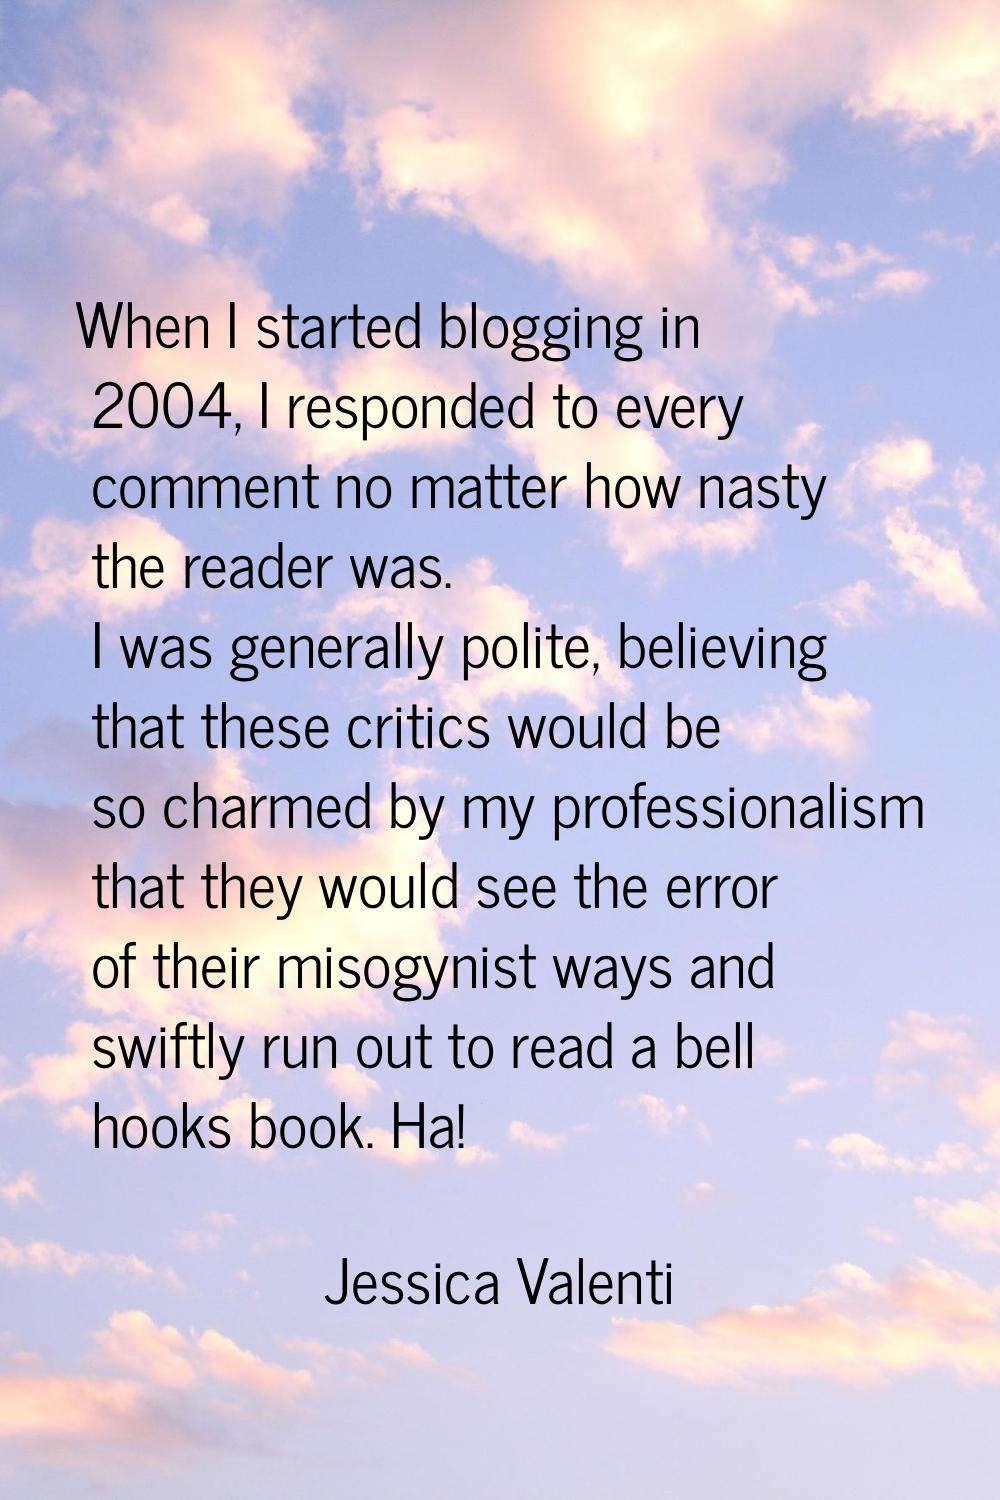 When I started blogging in 2004, I responded to every comment no matter how nasty the reader was. I